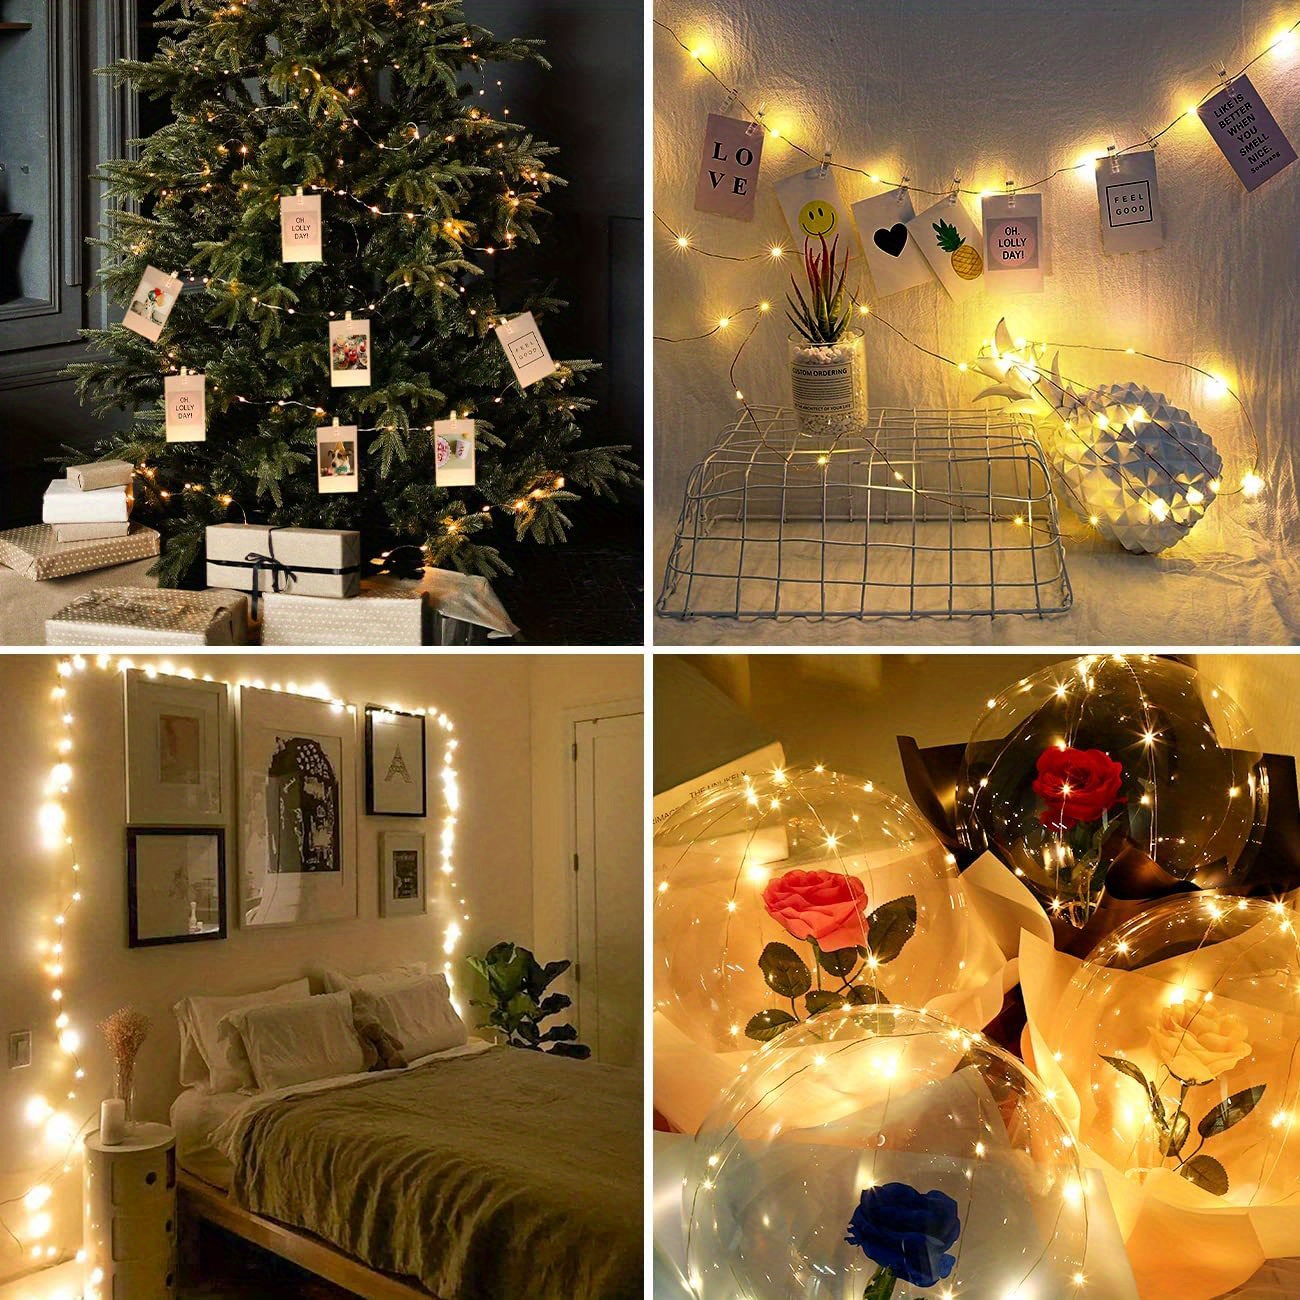 luz de clip de fotos fairy string lights with 100 led string 40 wooden clips for hanging pictures for bedroom party diwali decoration lights wall christmas halloween valentines day decoration sports & outdoors details 5